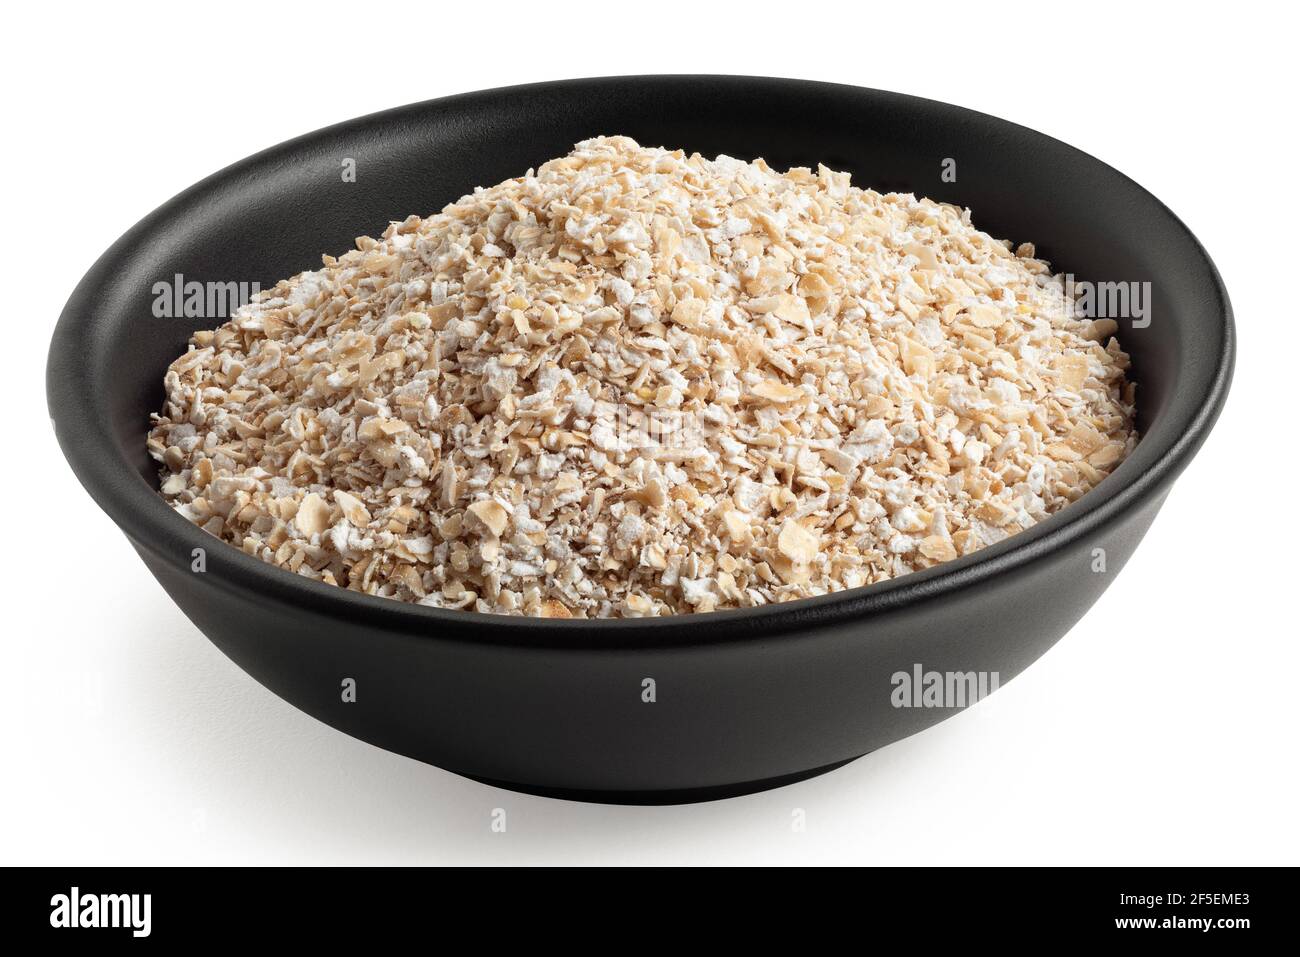 Uncooked coarse oatmeal in a black ceramic bowl isolated on white. Stock Photo